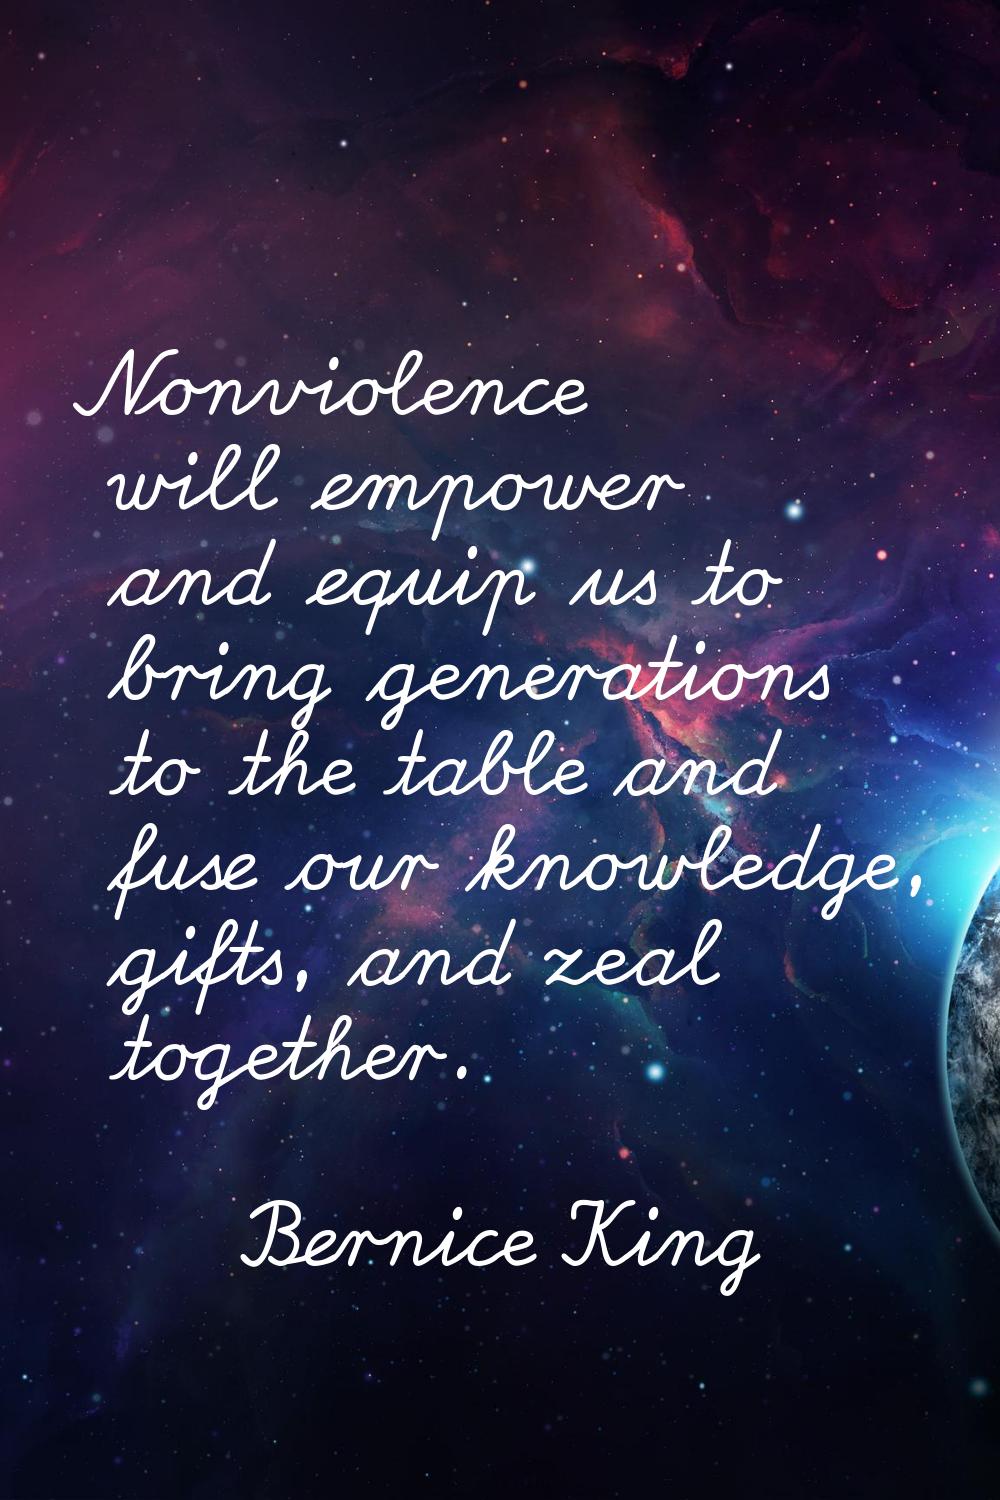 Nonviolence will empower and equip us to bring generations to the table and fuse our knowledge, gif